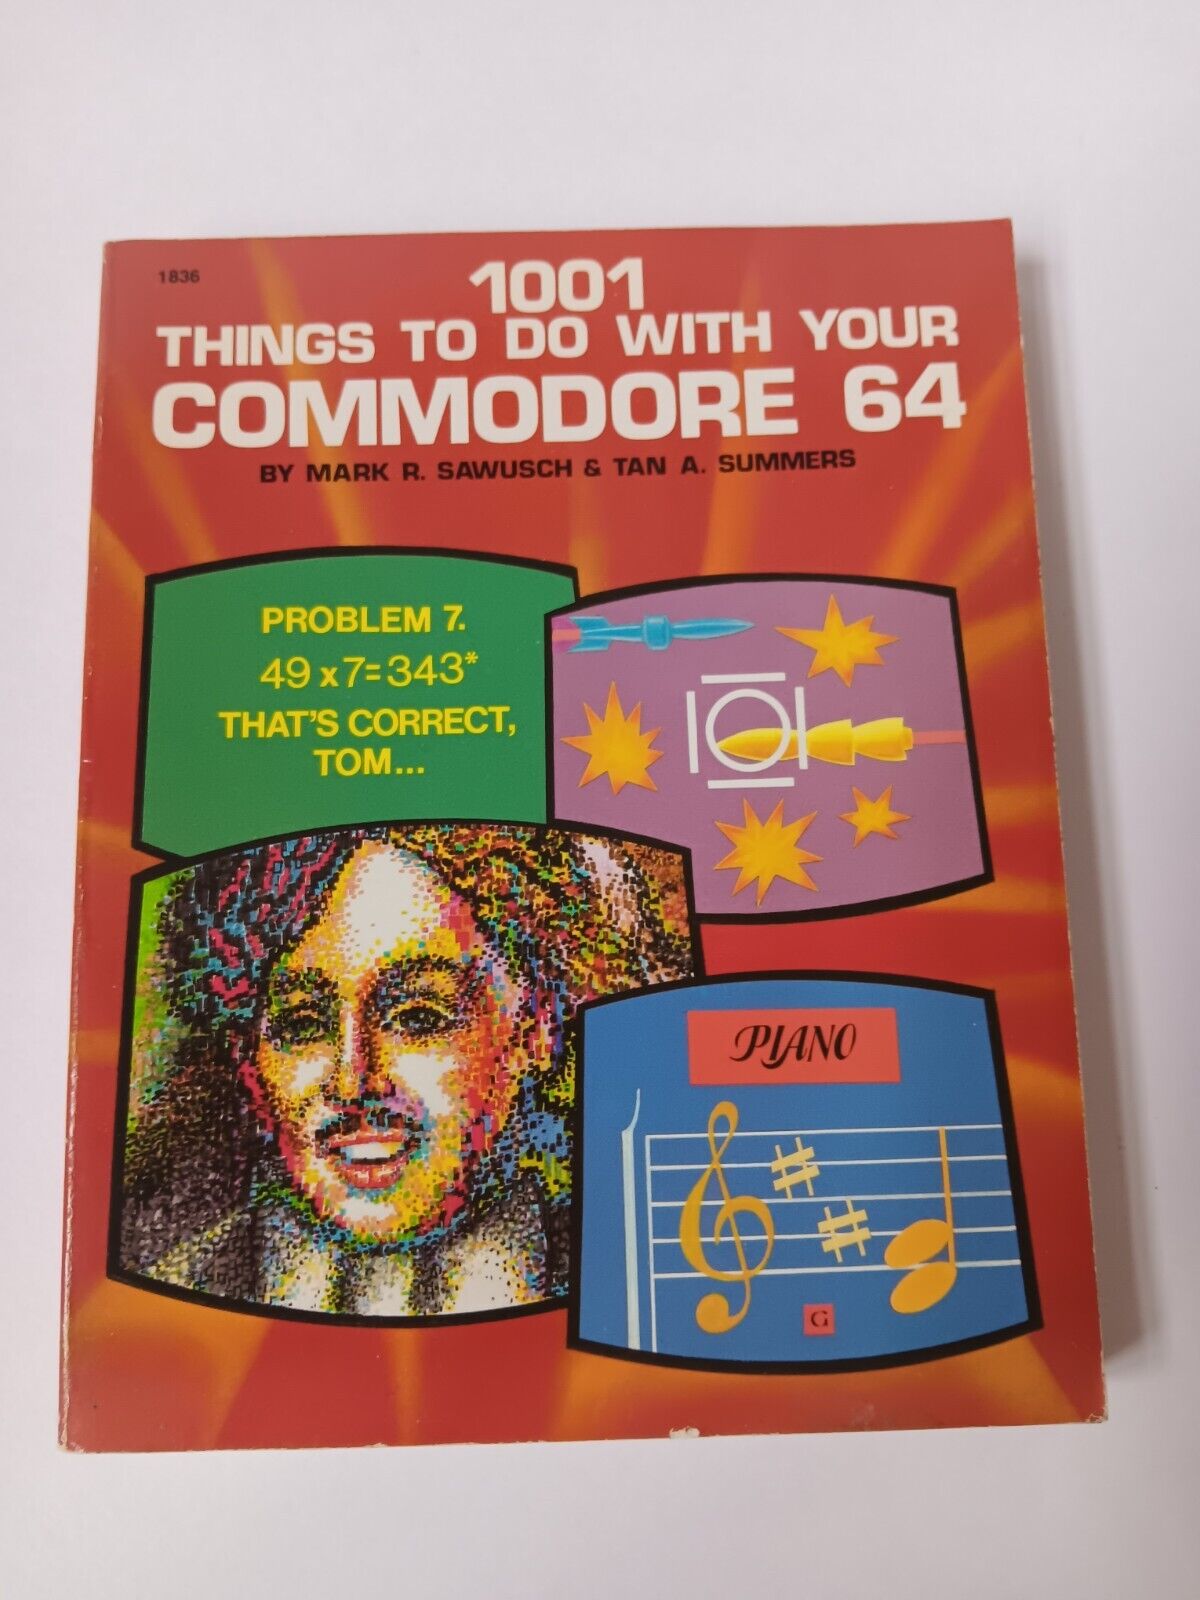 1001 Things To Do With Your Commodore 64 Paperback Book, Sawusch & Summers